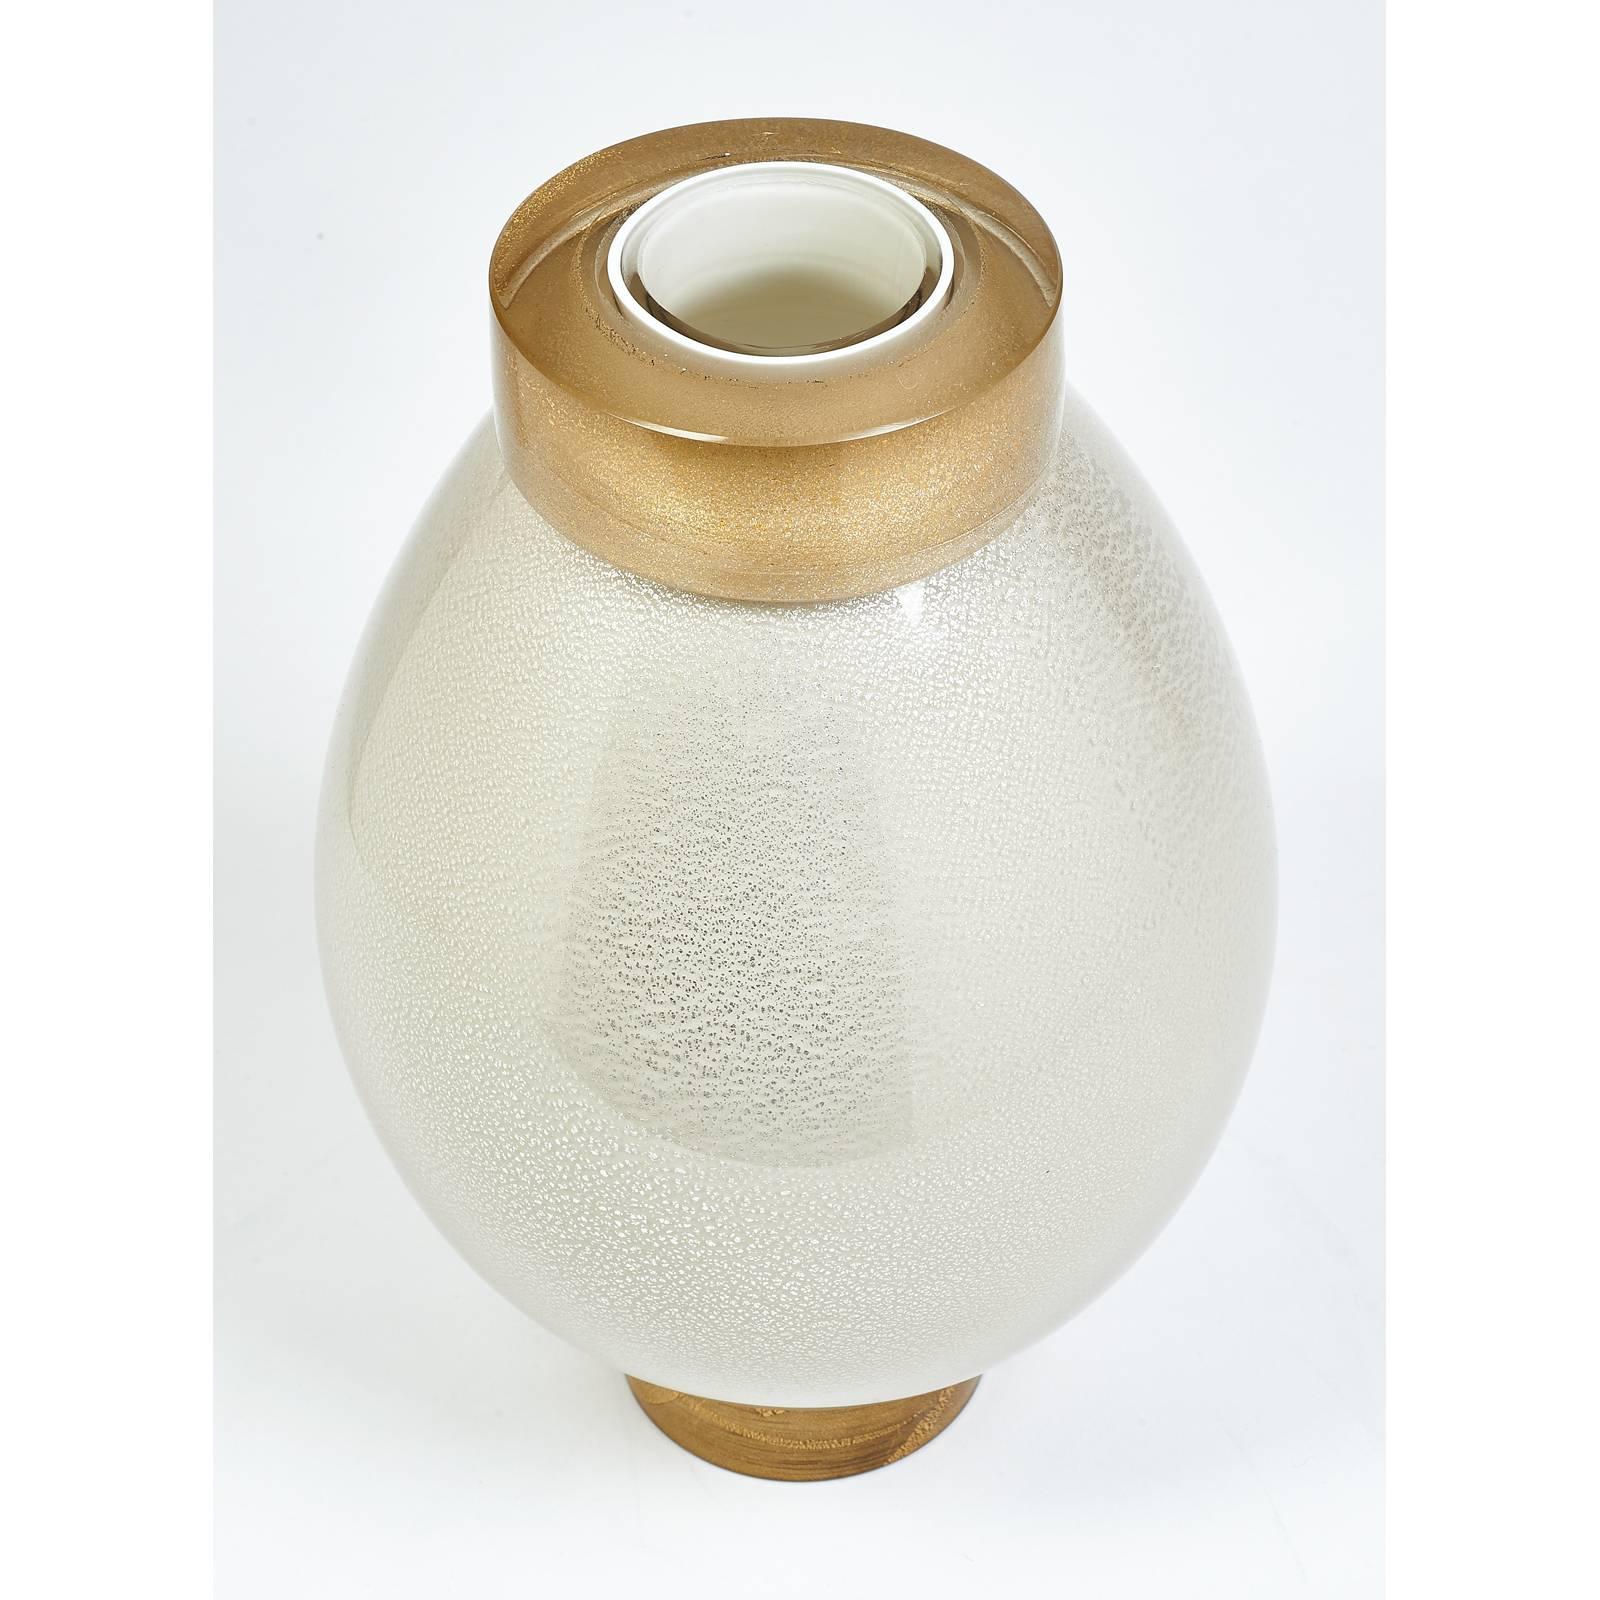 Italy, contemporary
An exquisite blown glass vase, in the manner of Seguso
Multiple layers of clear and opaline glass flecked
with gold leaf (collar and base) and silver leaf (body)
One available.
Measures: 12 height x 7 diameter.